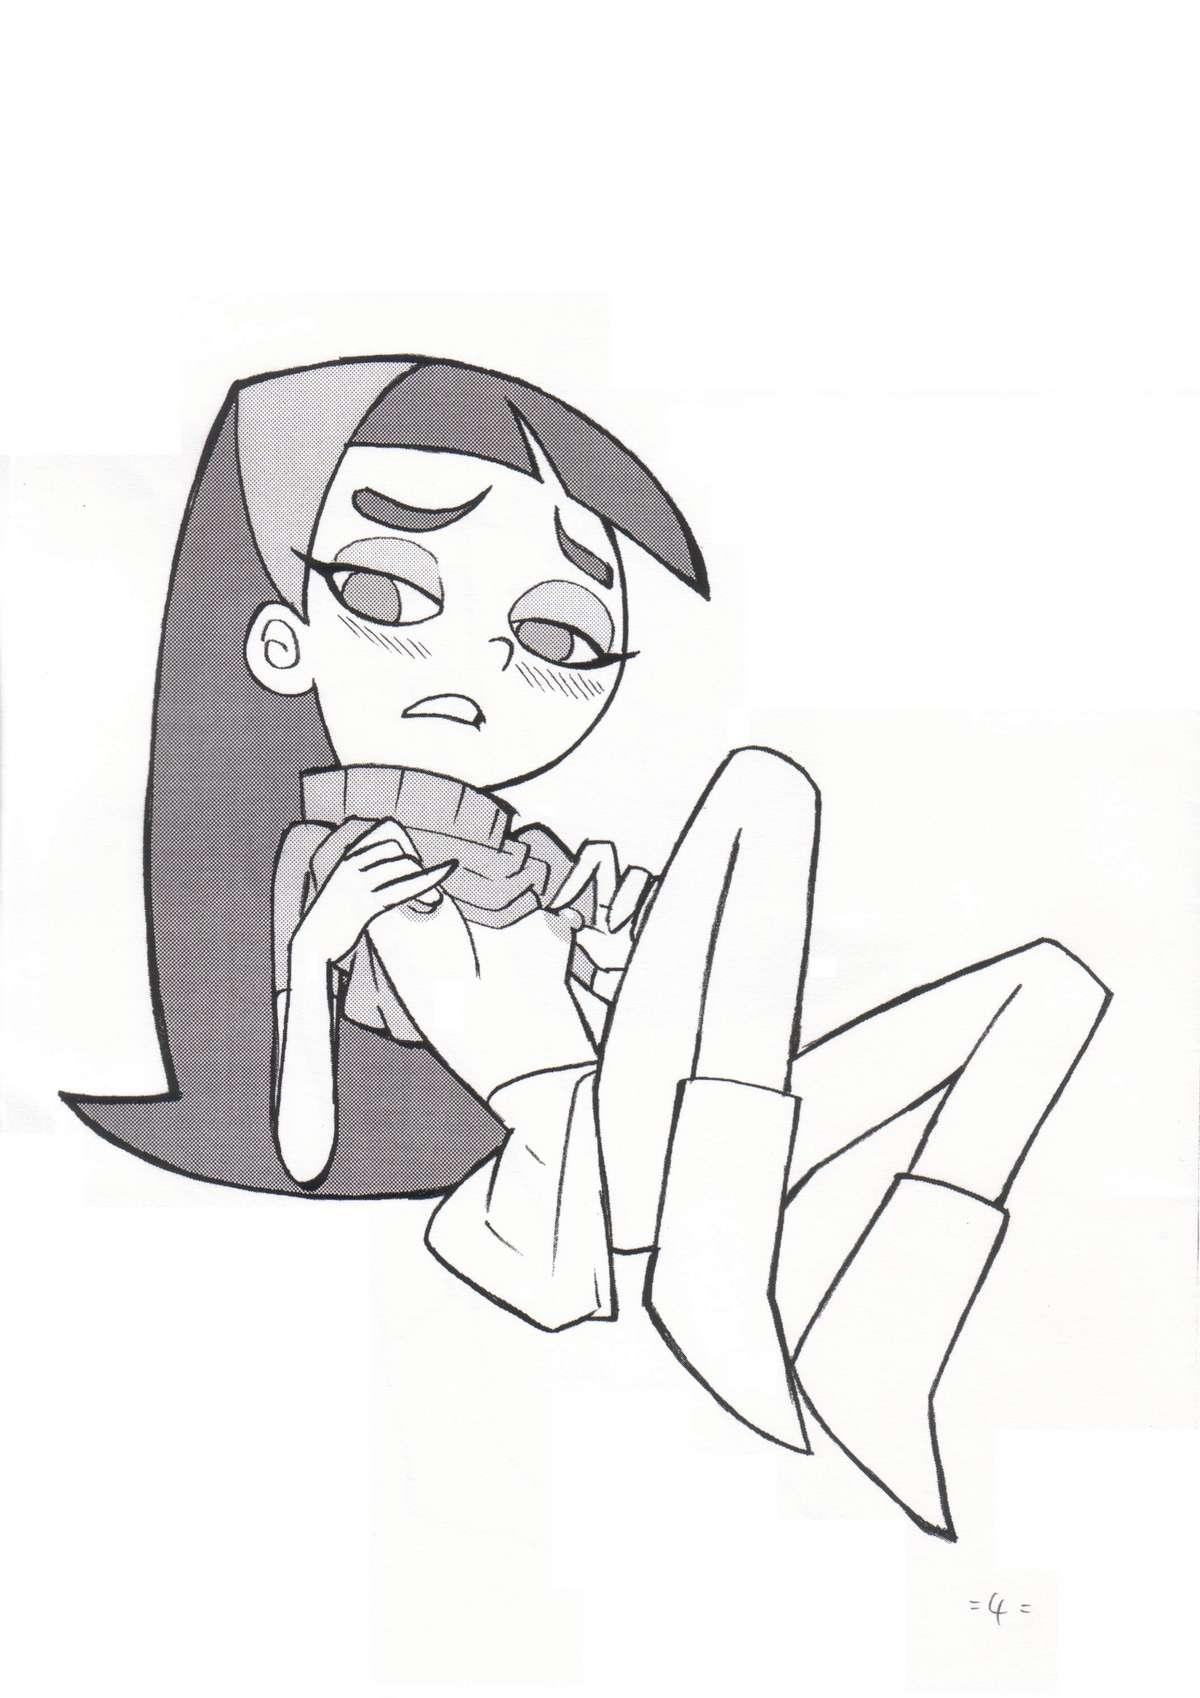 Bangkok Psychosomatic Counterfeit Ex: Trixie - The fairly oddparents Assfuck - Page 3